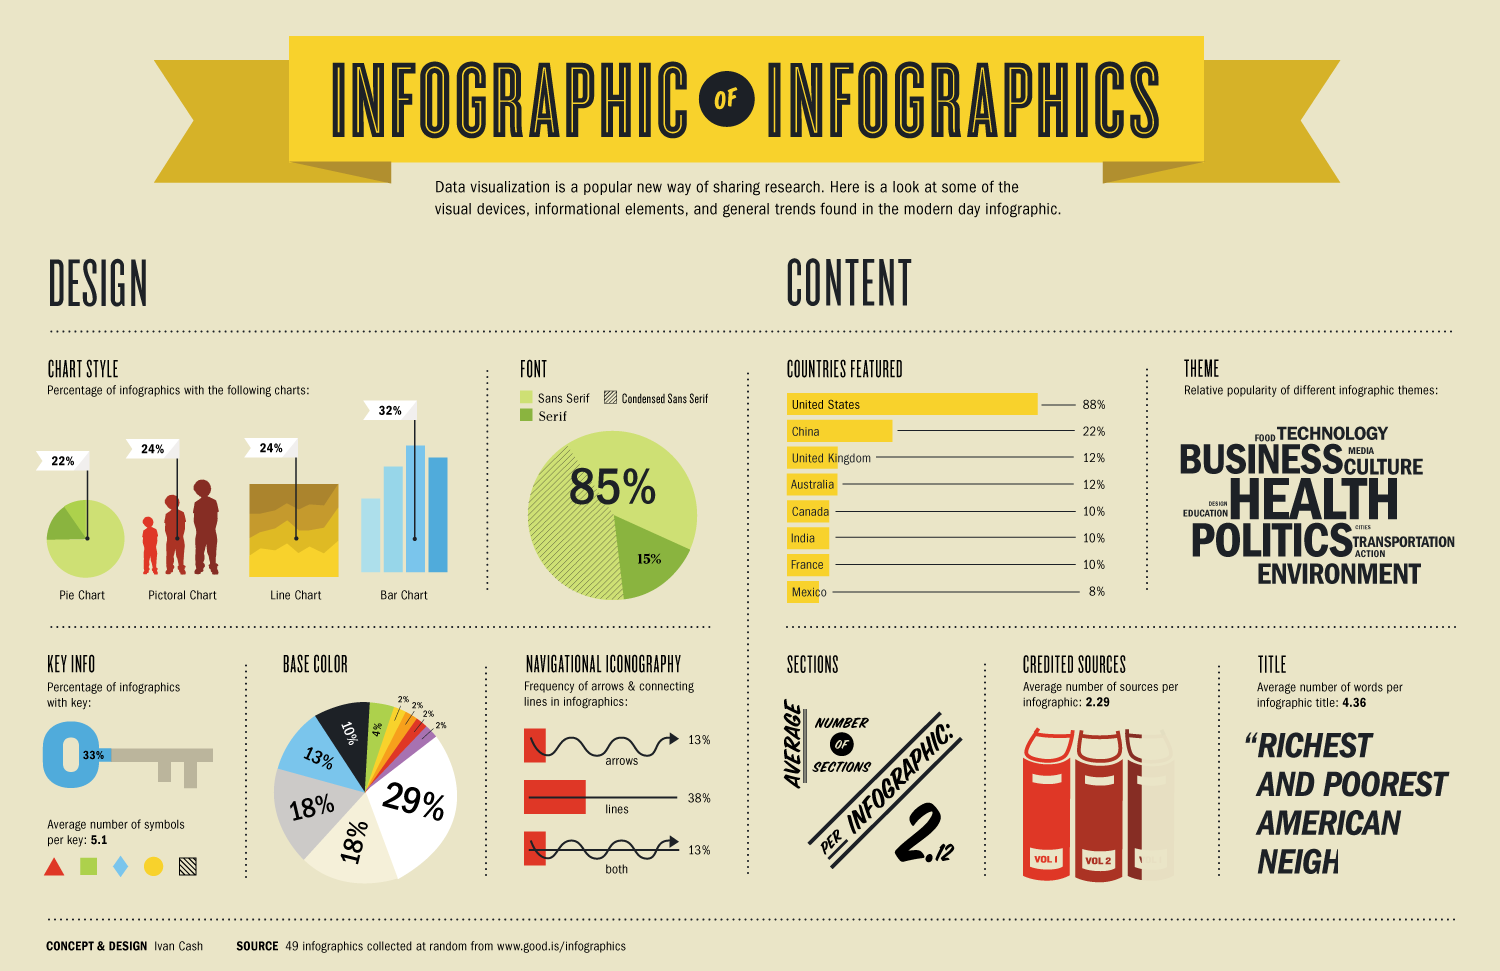 A collection of graphs and pie charts illustrating infographic trends